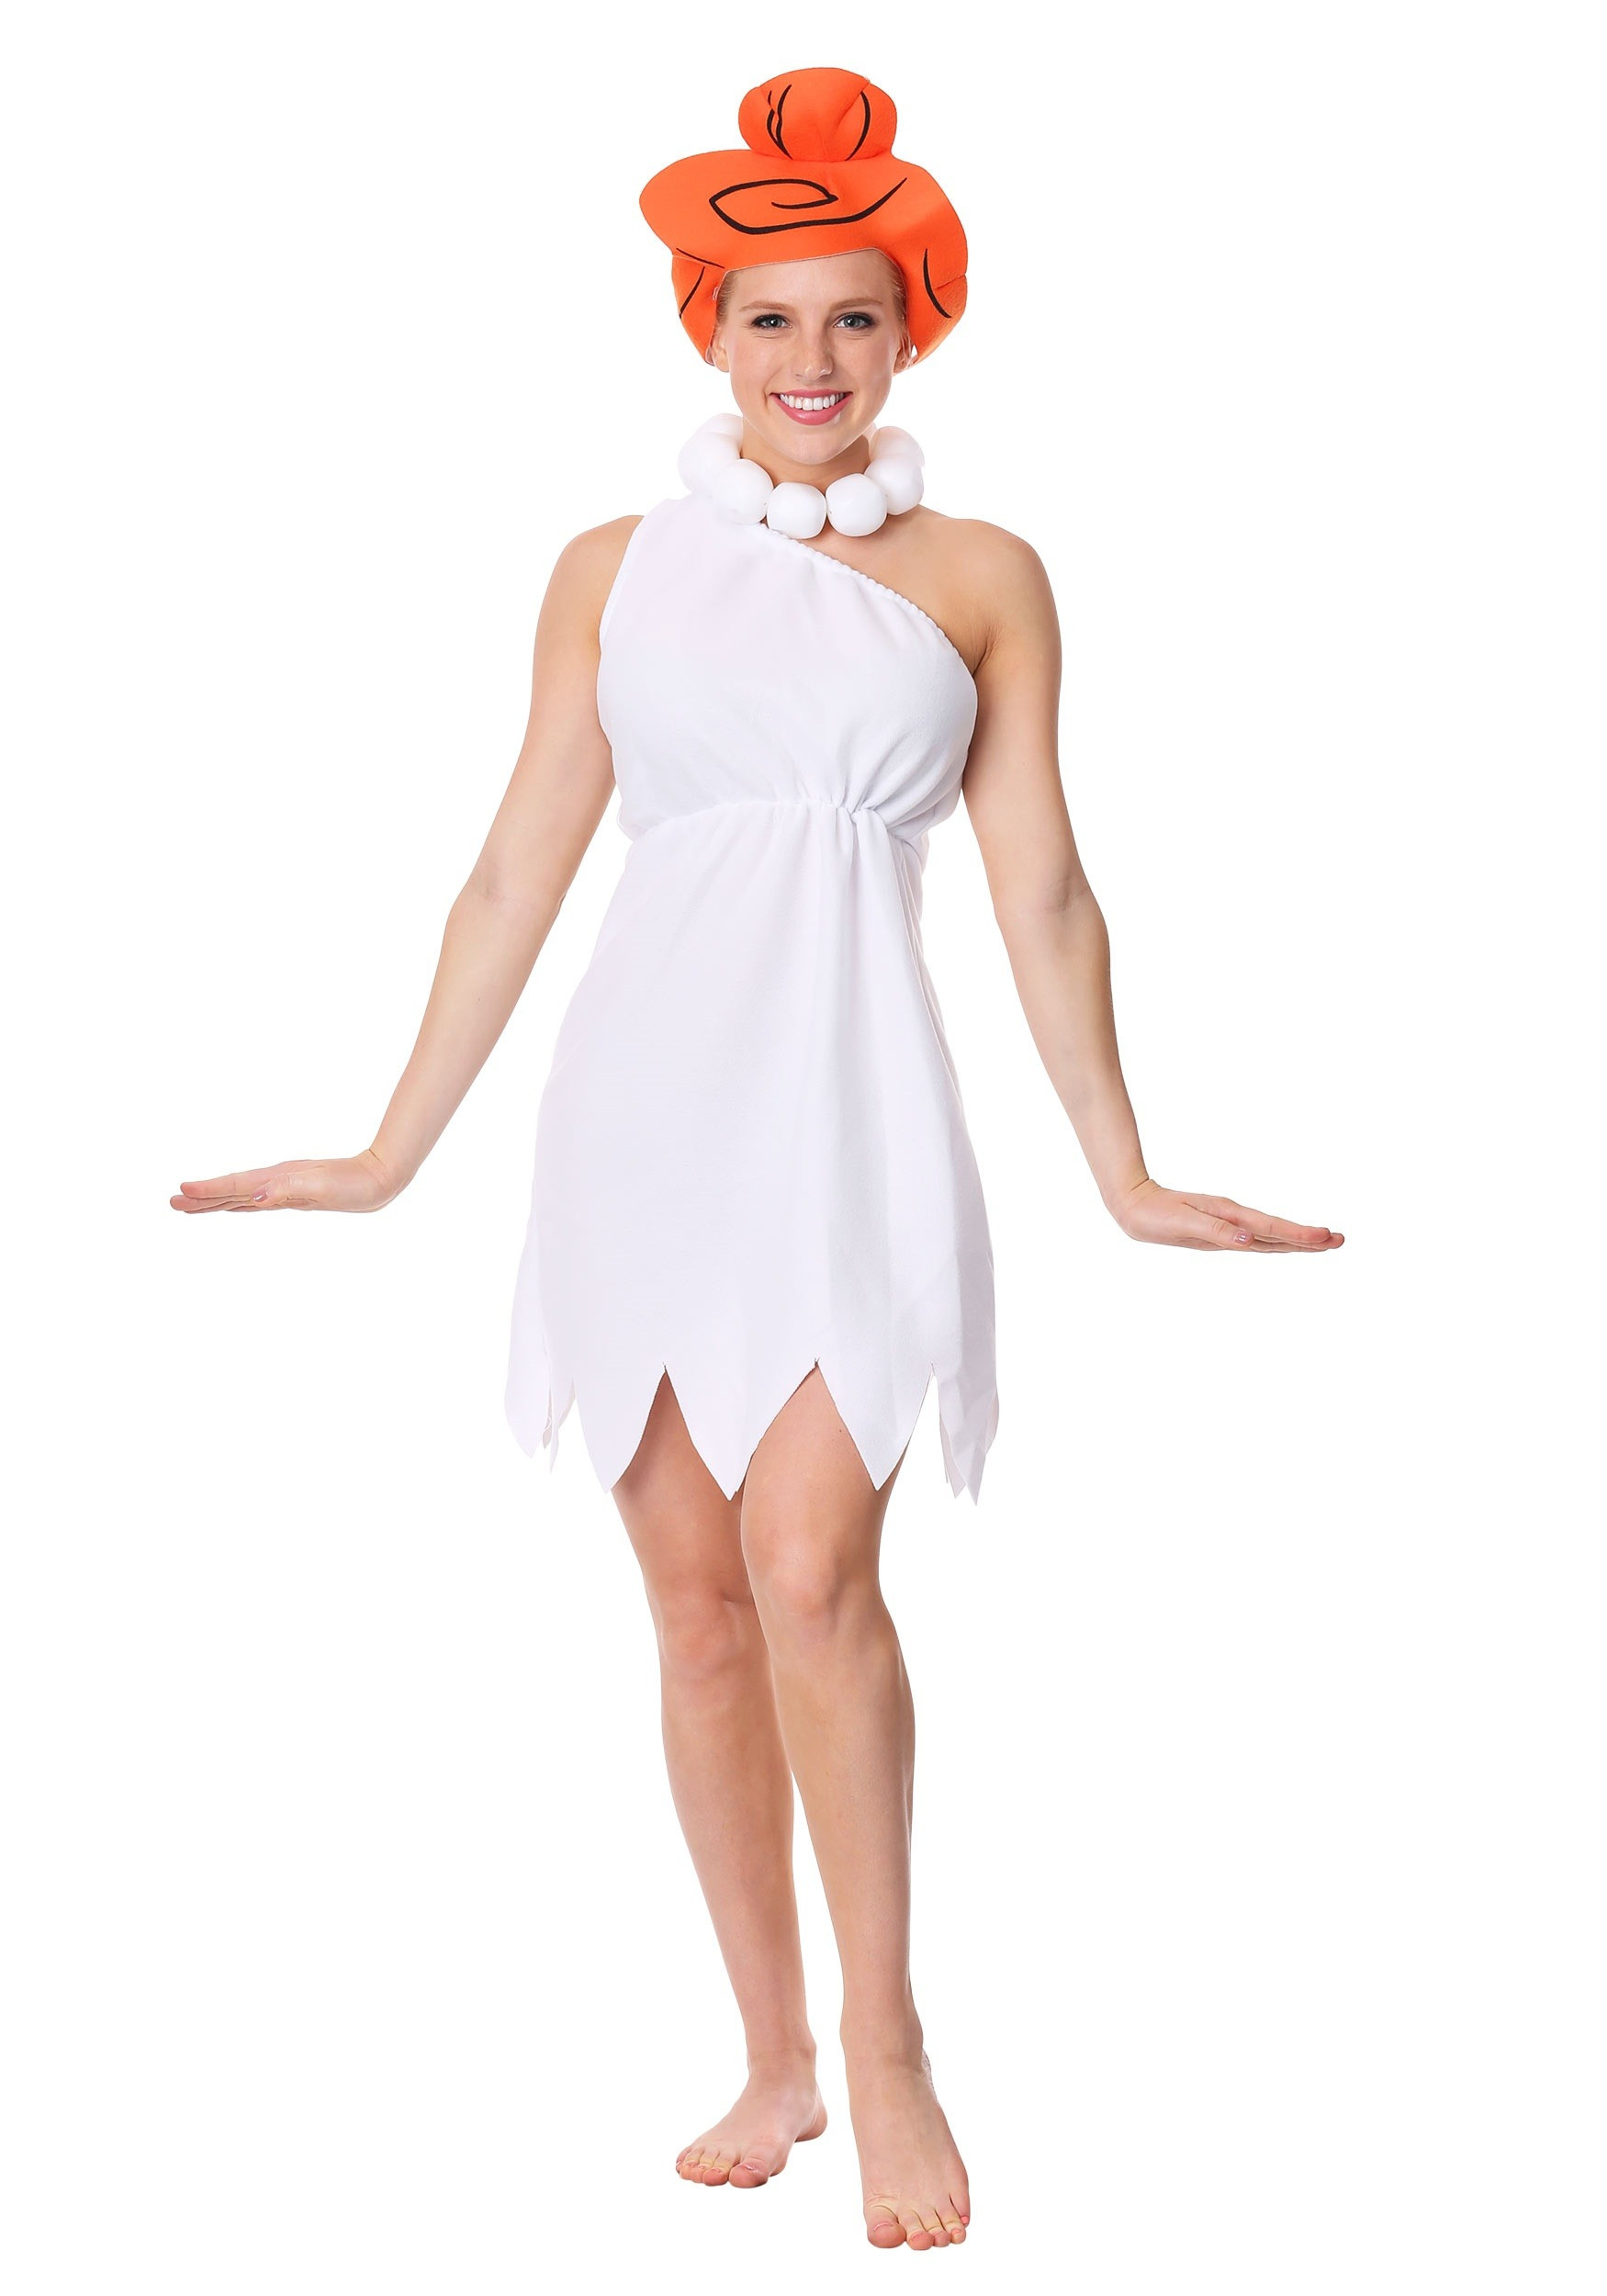 DIY Costumes For Adults
 Wilma Flintstone Adult Costume